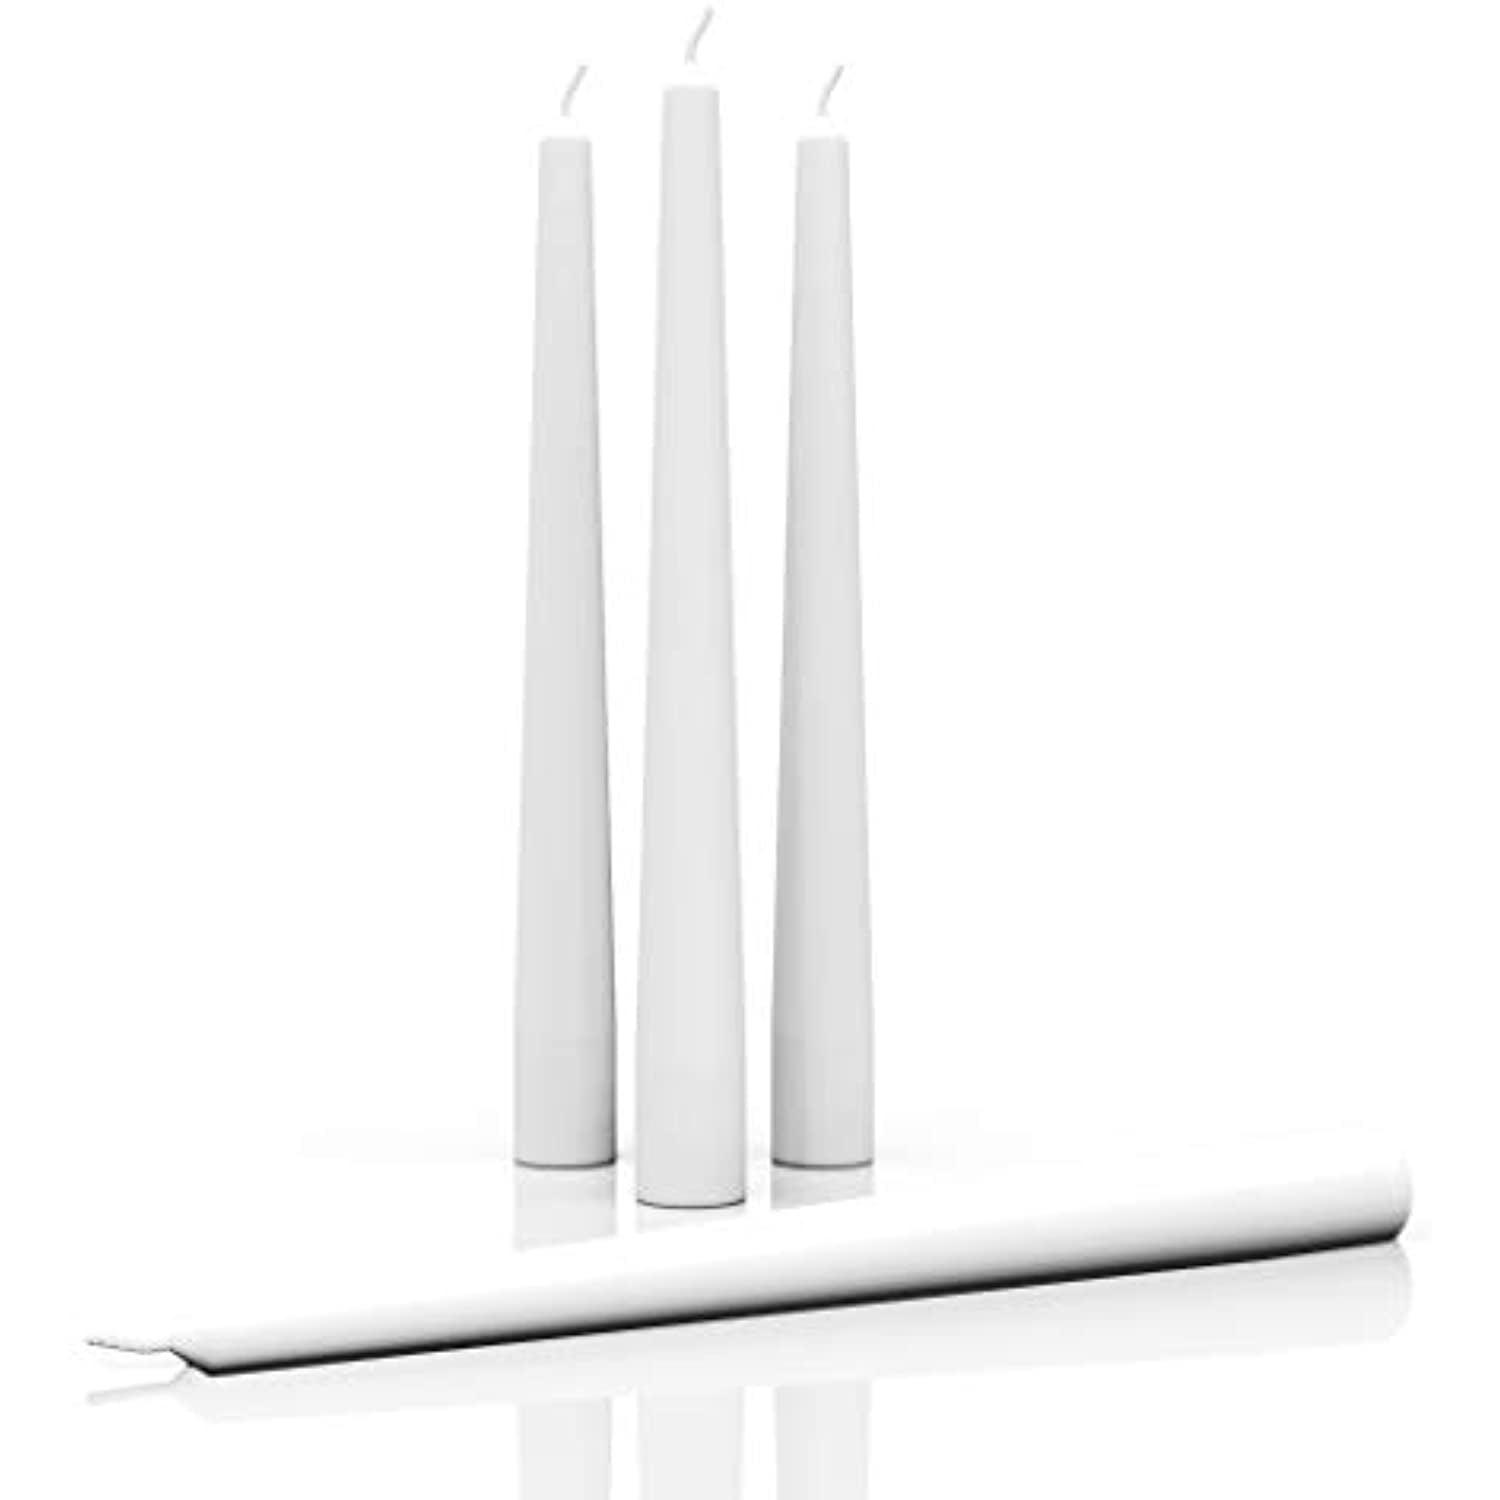 Dripless and Smokeless Candle Unscented CANDWAX 8 inch Taper Candles Set of 4 